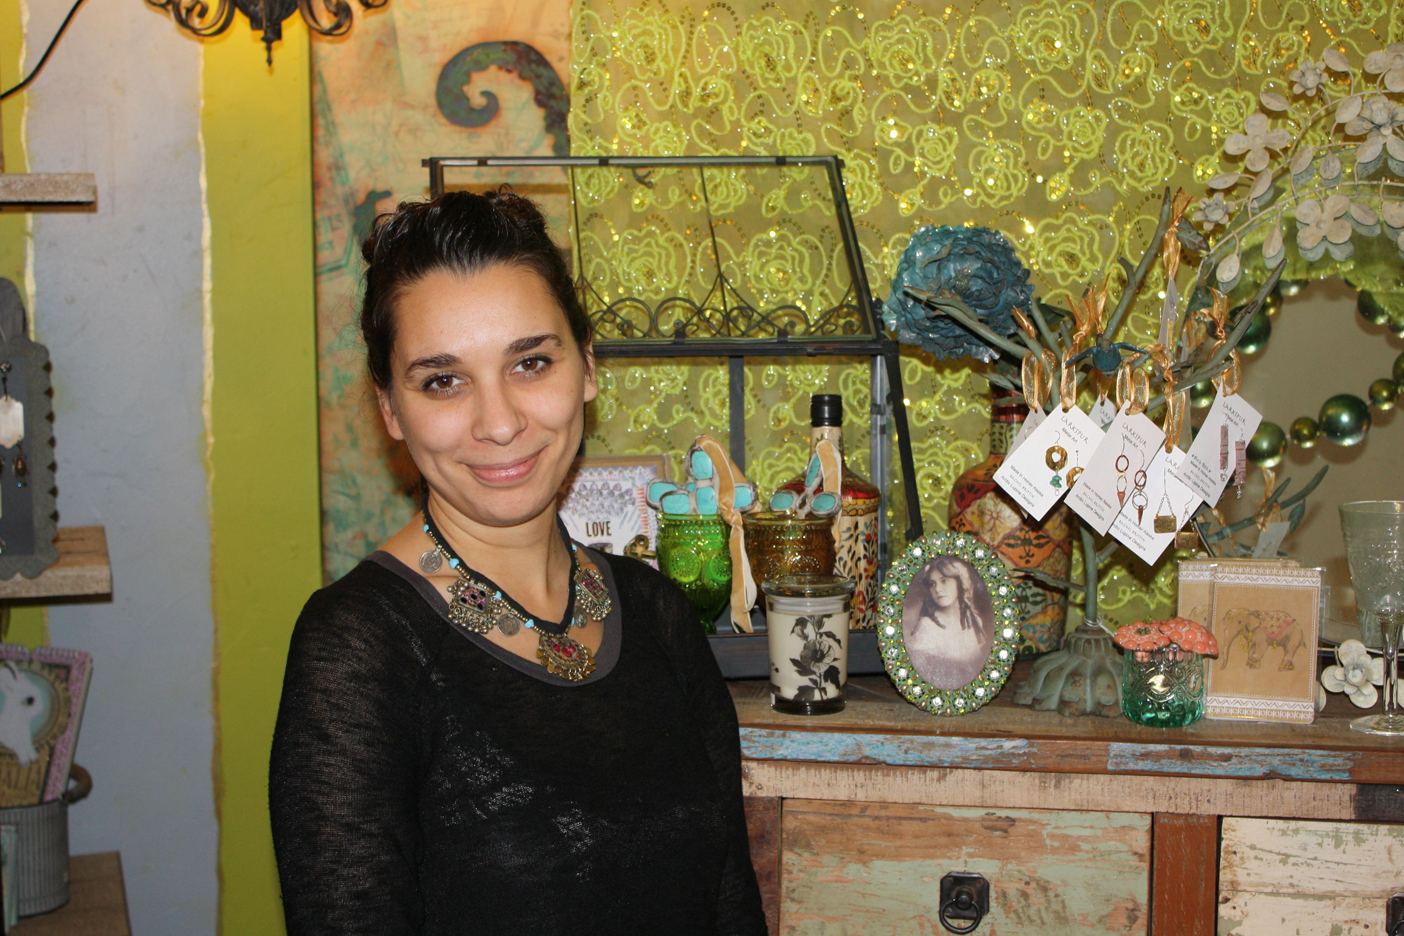 Bekah Dalke pauses for a picture in front of a display that shows a bit of the diversity featured in her new shop, Oodalolly.-Photo by Lindsay Olsen